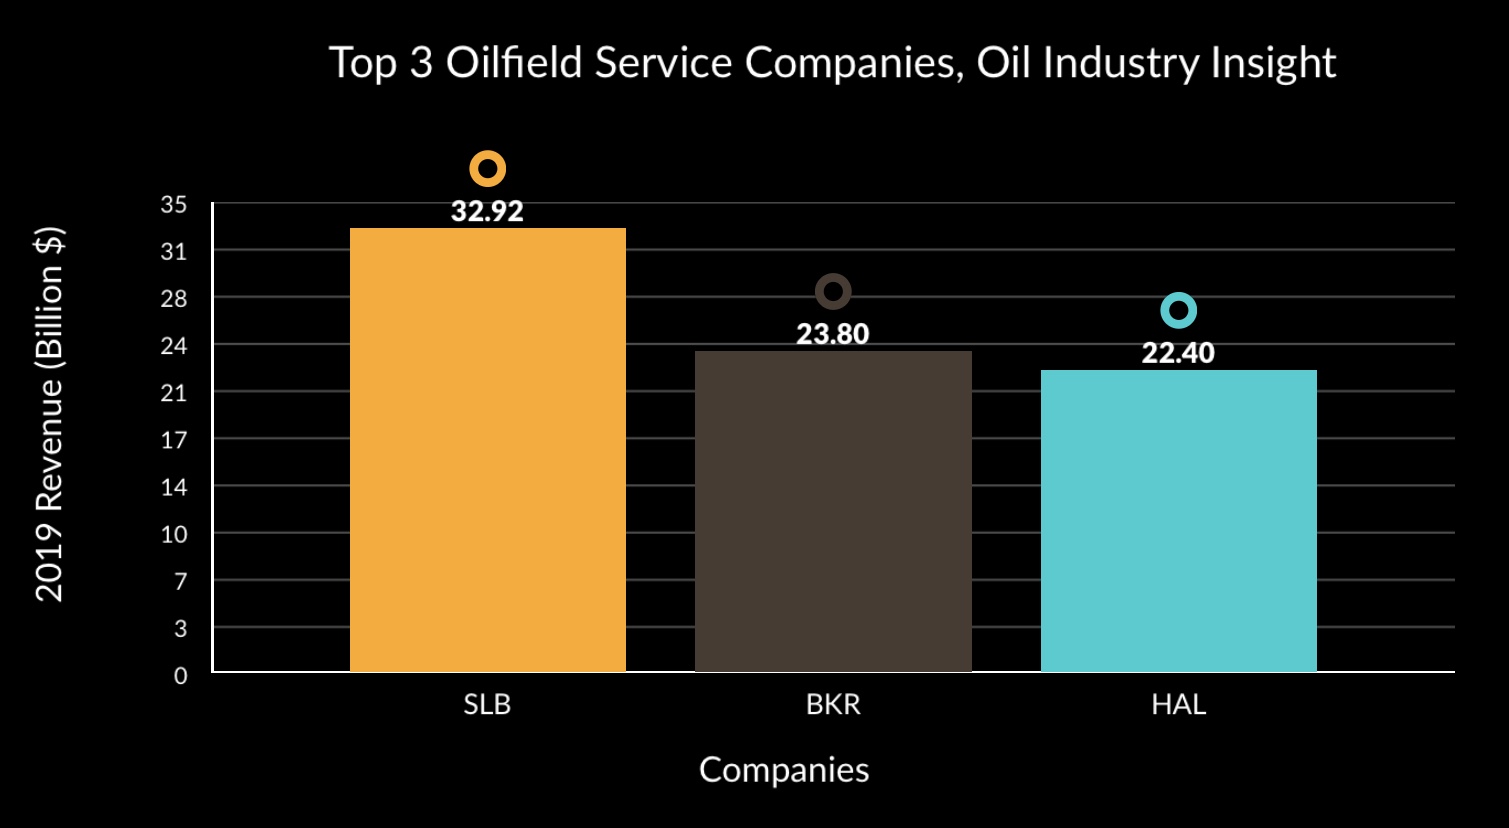 The World Top 3 Oilfield Service Companies based on 2019 Revenue, Source: Oil Industry Insight